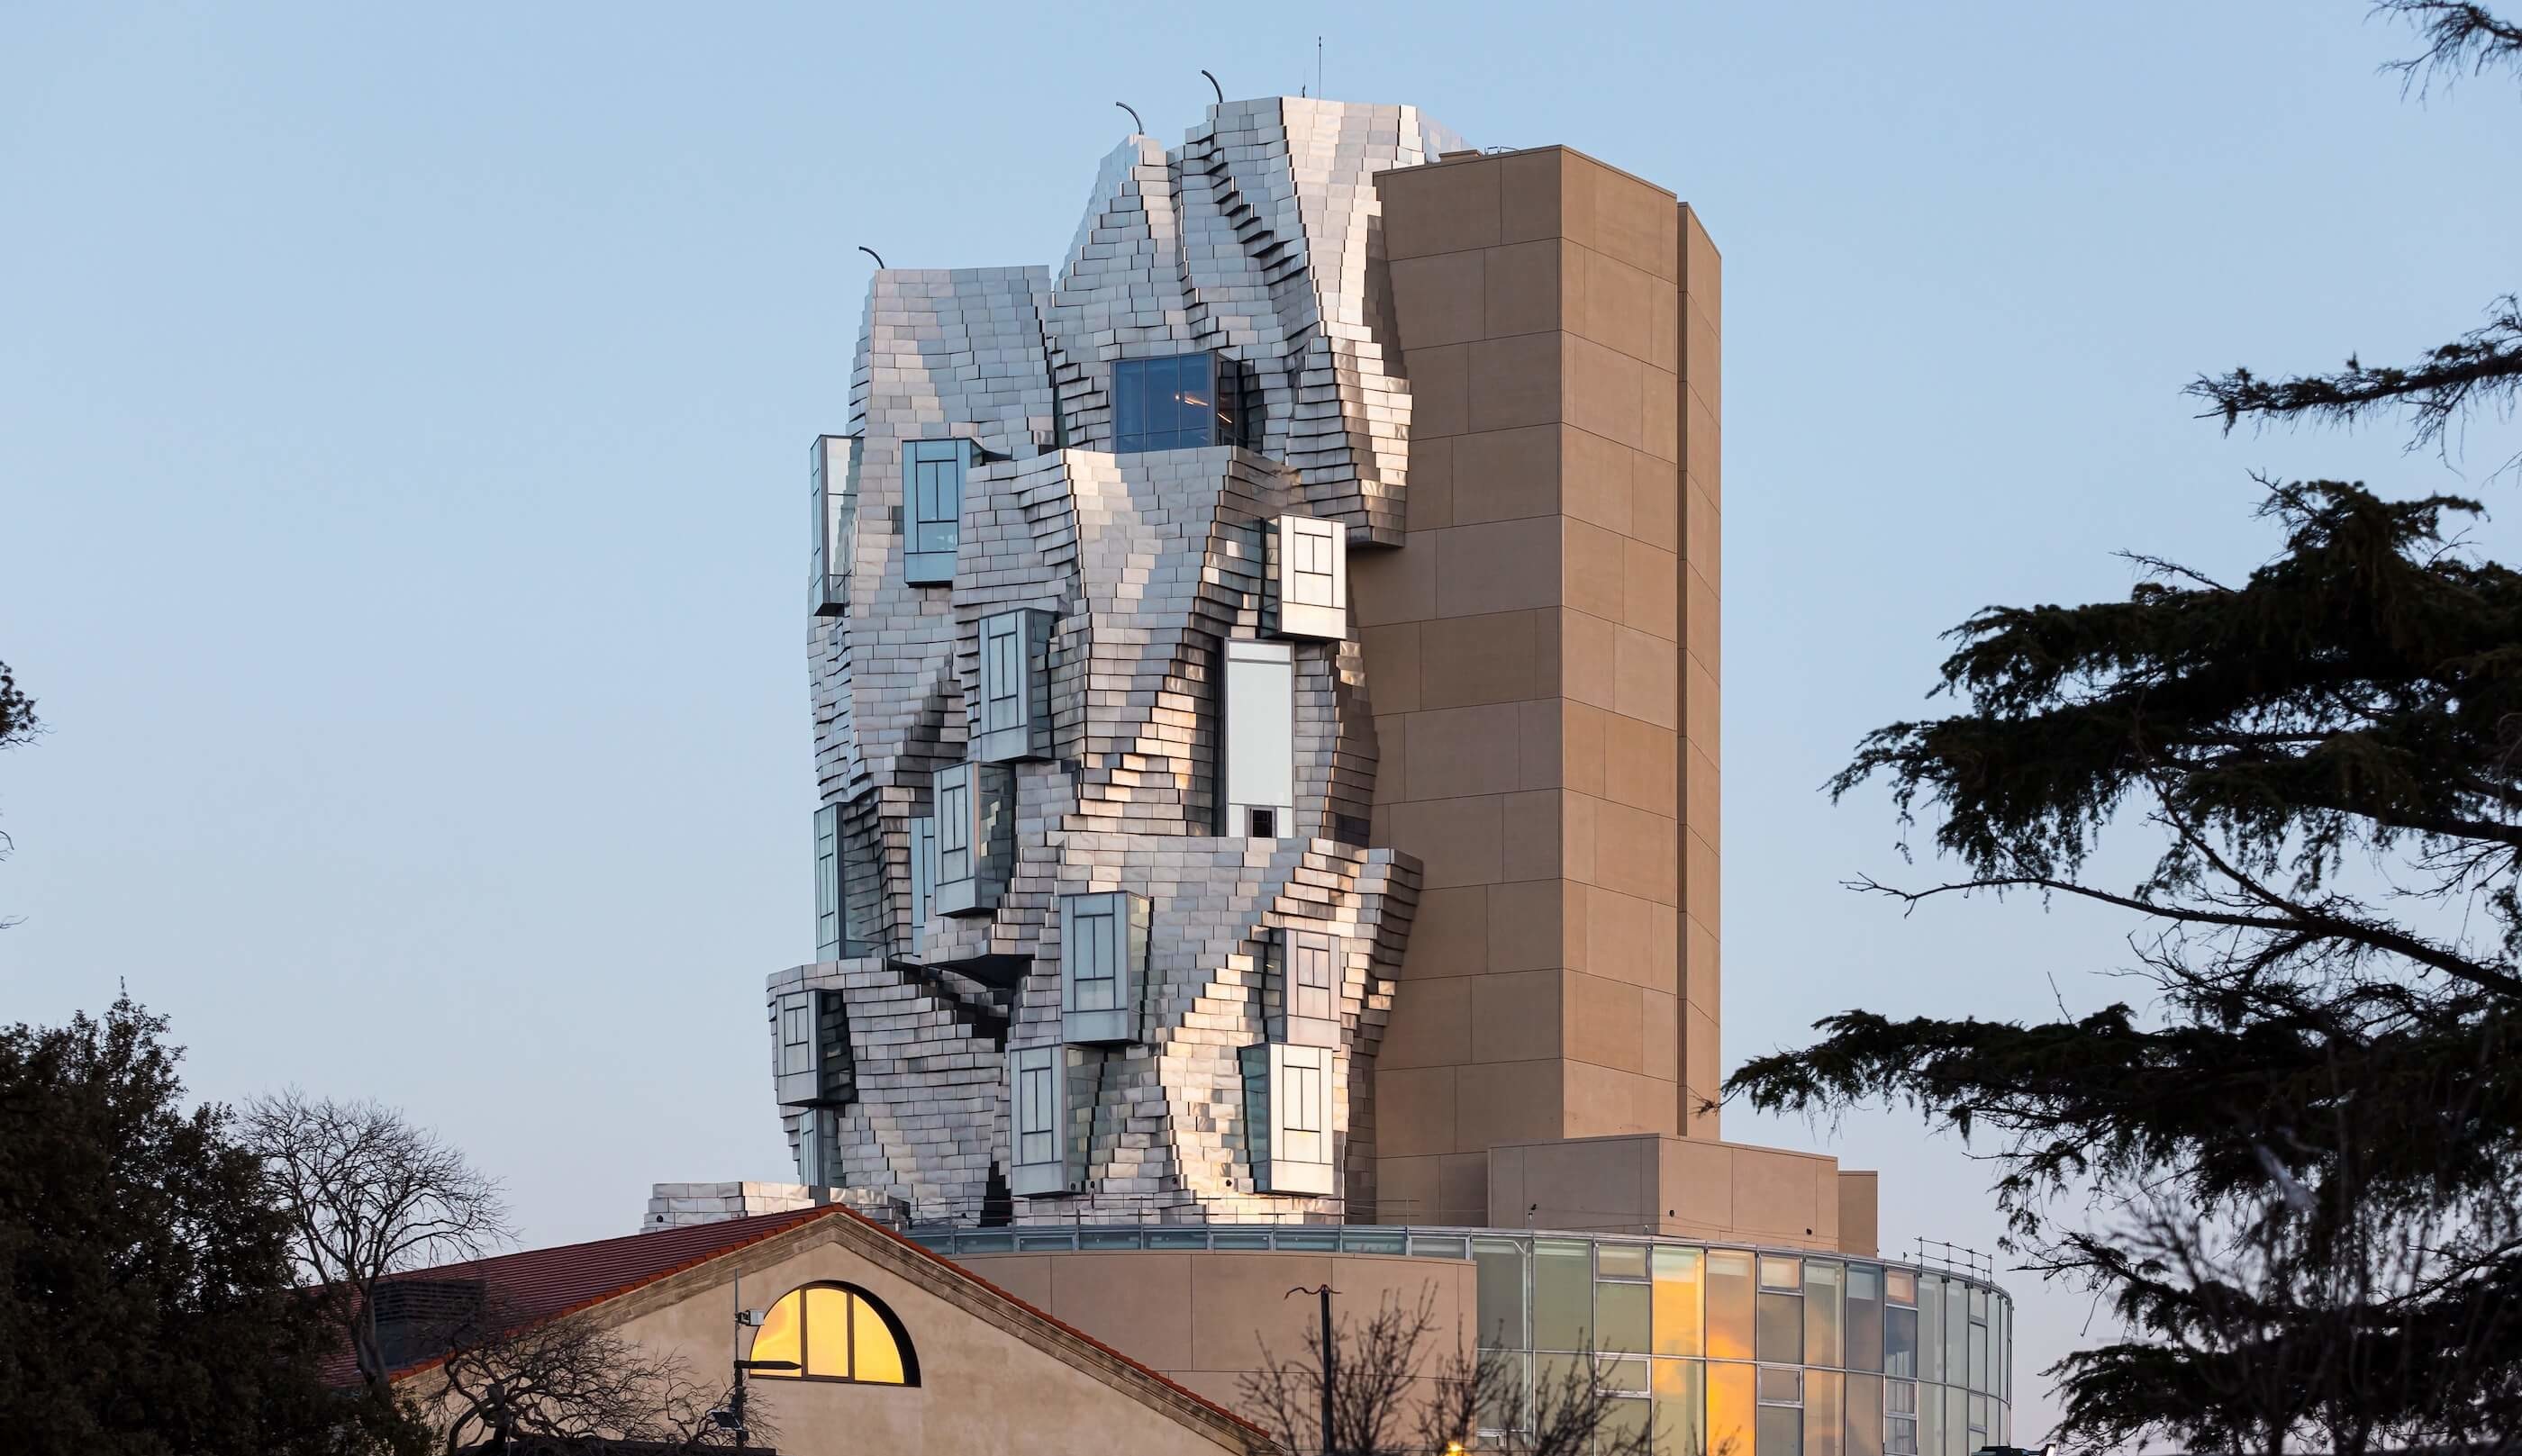 A New Frank Gehry Tower Rises Above the Quaint French Town of Arles, Arts  & Culture